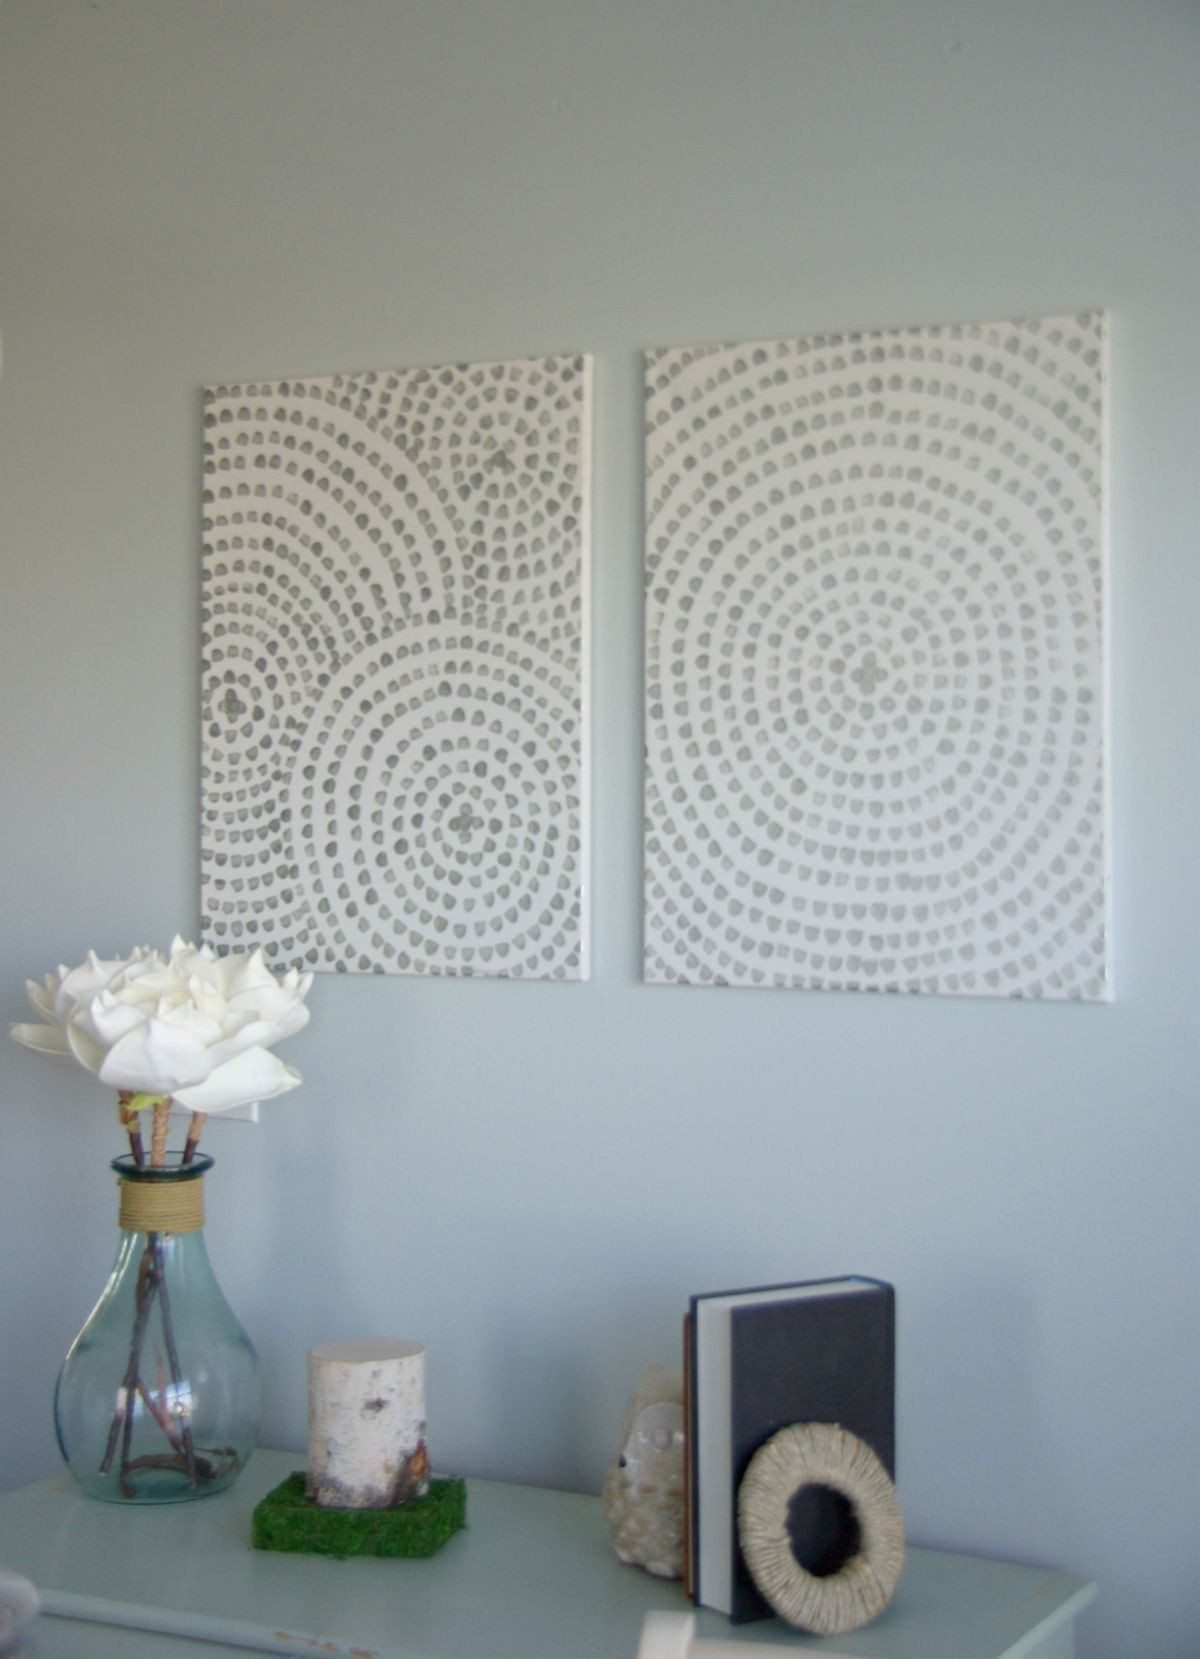 Diy Wall Decor
 DIY Canvas Wall Art A Low Cost Way To Add Art To Your Home